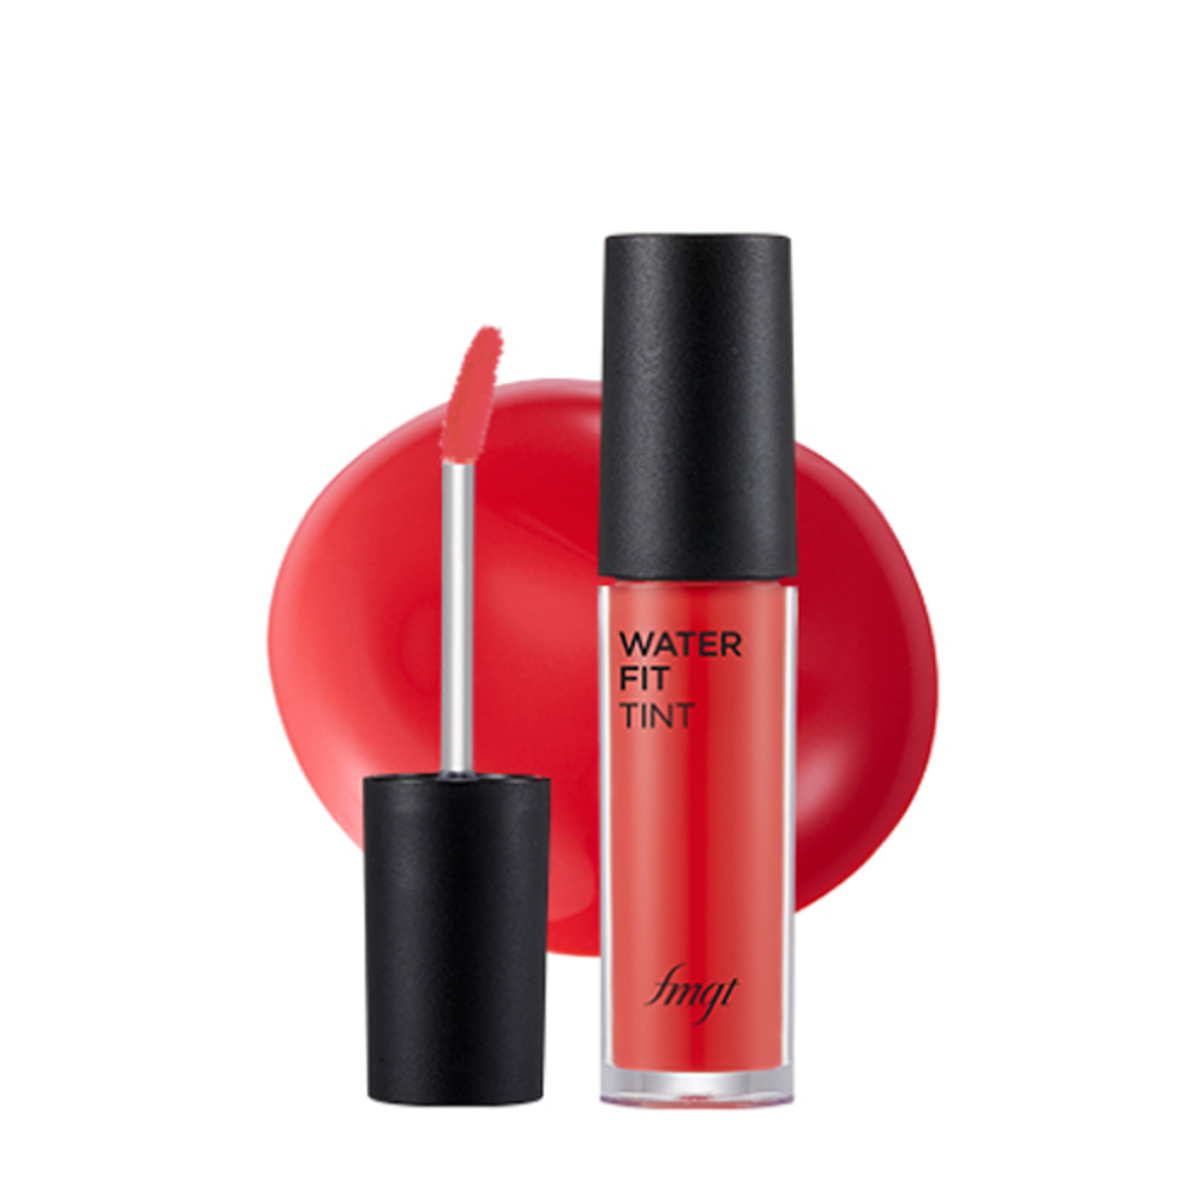 gift-fmgt-son-tint-li-thefaceshop-water-fit-lip-tint-5g-04-red-signal-1